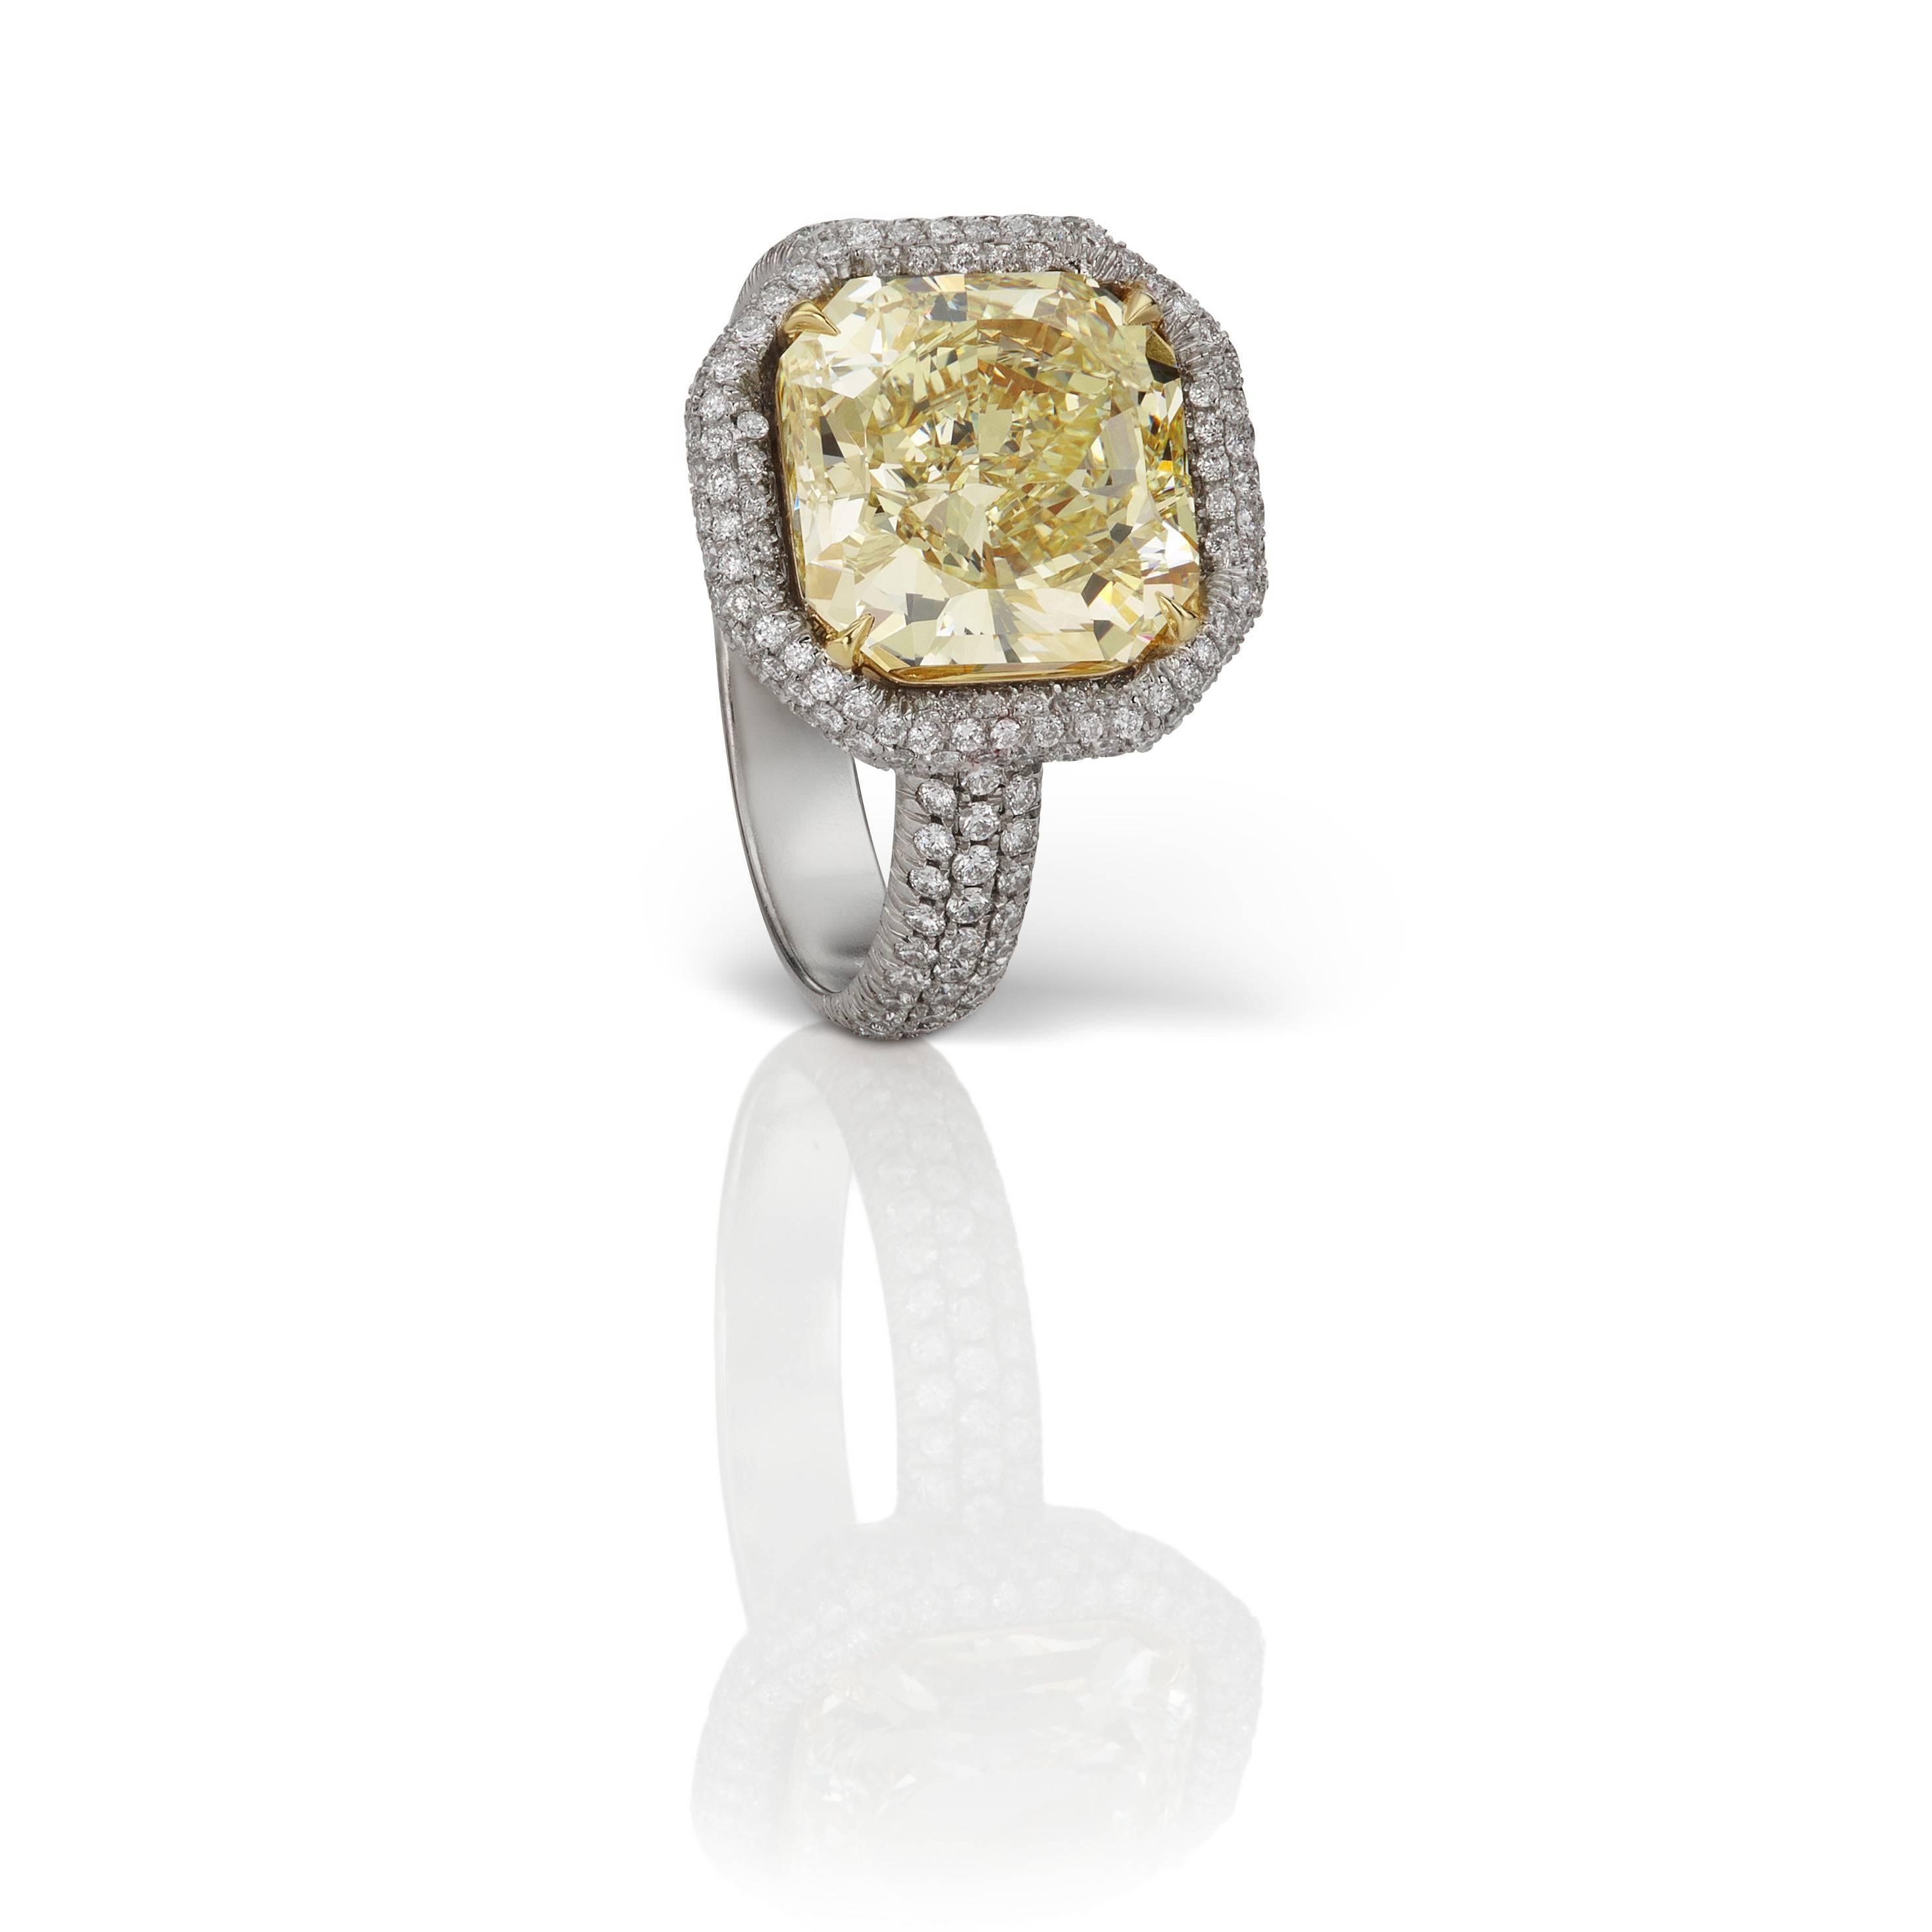 From Scarselli, this GIA certified 4.46 carat Fancy Yellow Radiant Cut Diamond set in a platinum pave mounting with 0.75 total carats of white diamonds (see certificate picture for detailed stone information).  This diamond may be custom designed to